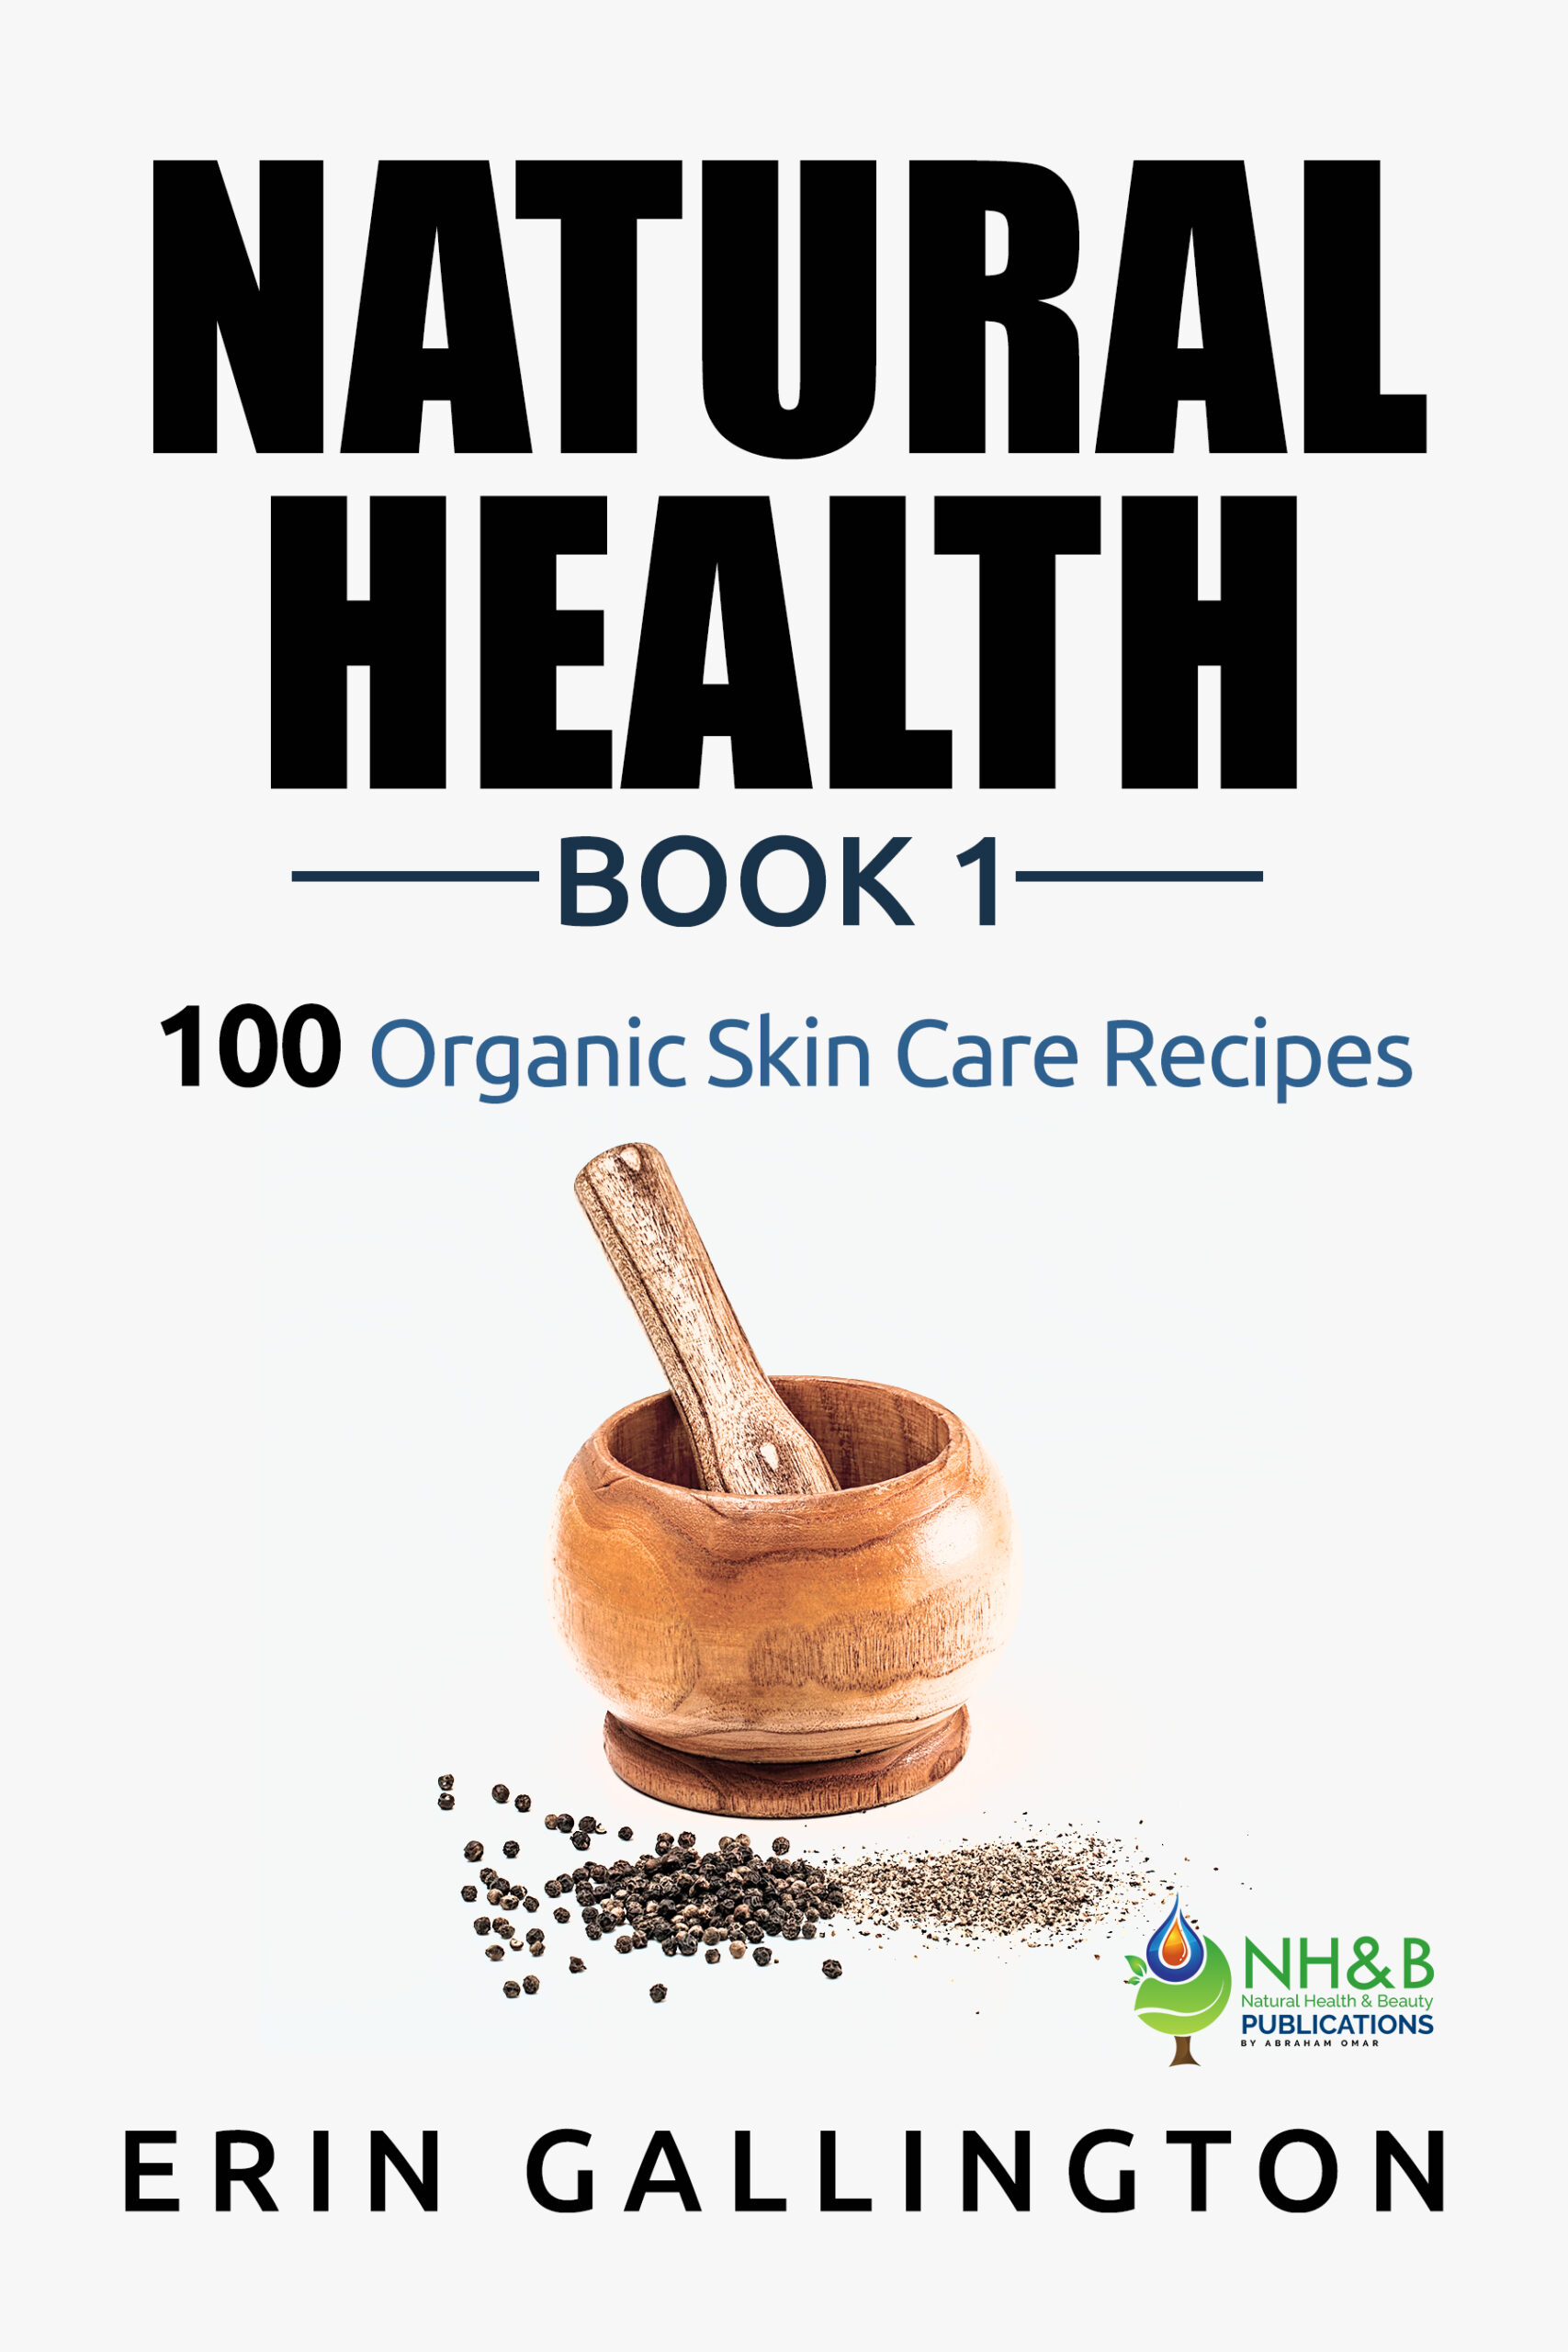 FREE: Skin Care Recipes: 100 Natural homemade organic skin care recipes, stay fresh, Anti-Aging, Hair scrubs, Face masks, Body lotions, Body butter, essential … Tooth care, Baby (Natural Health Book 1) by Erin Gallington